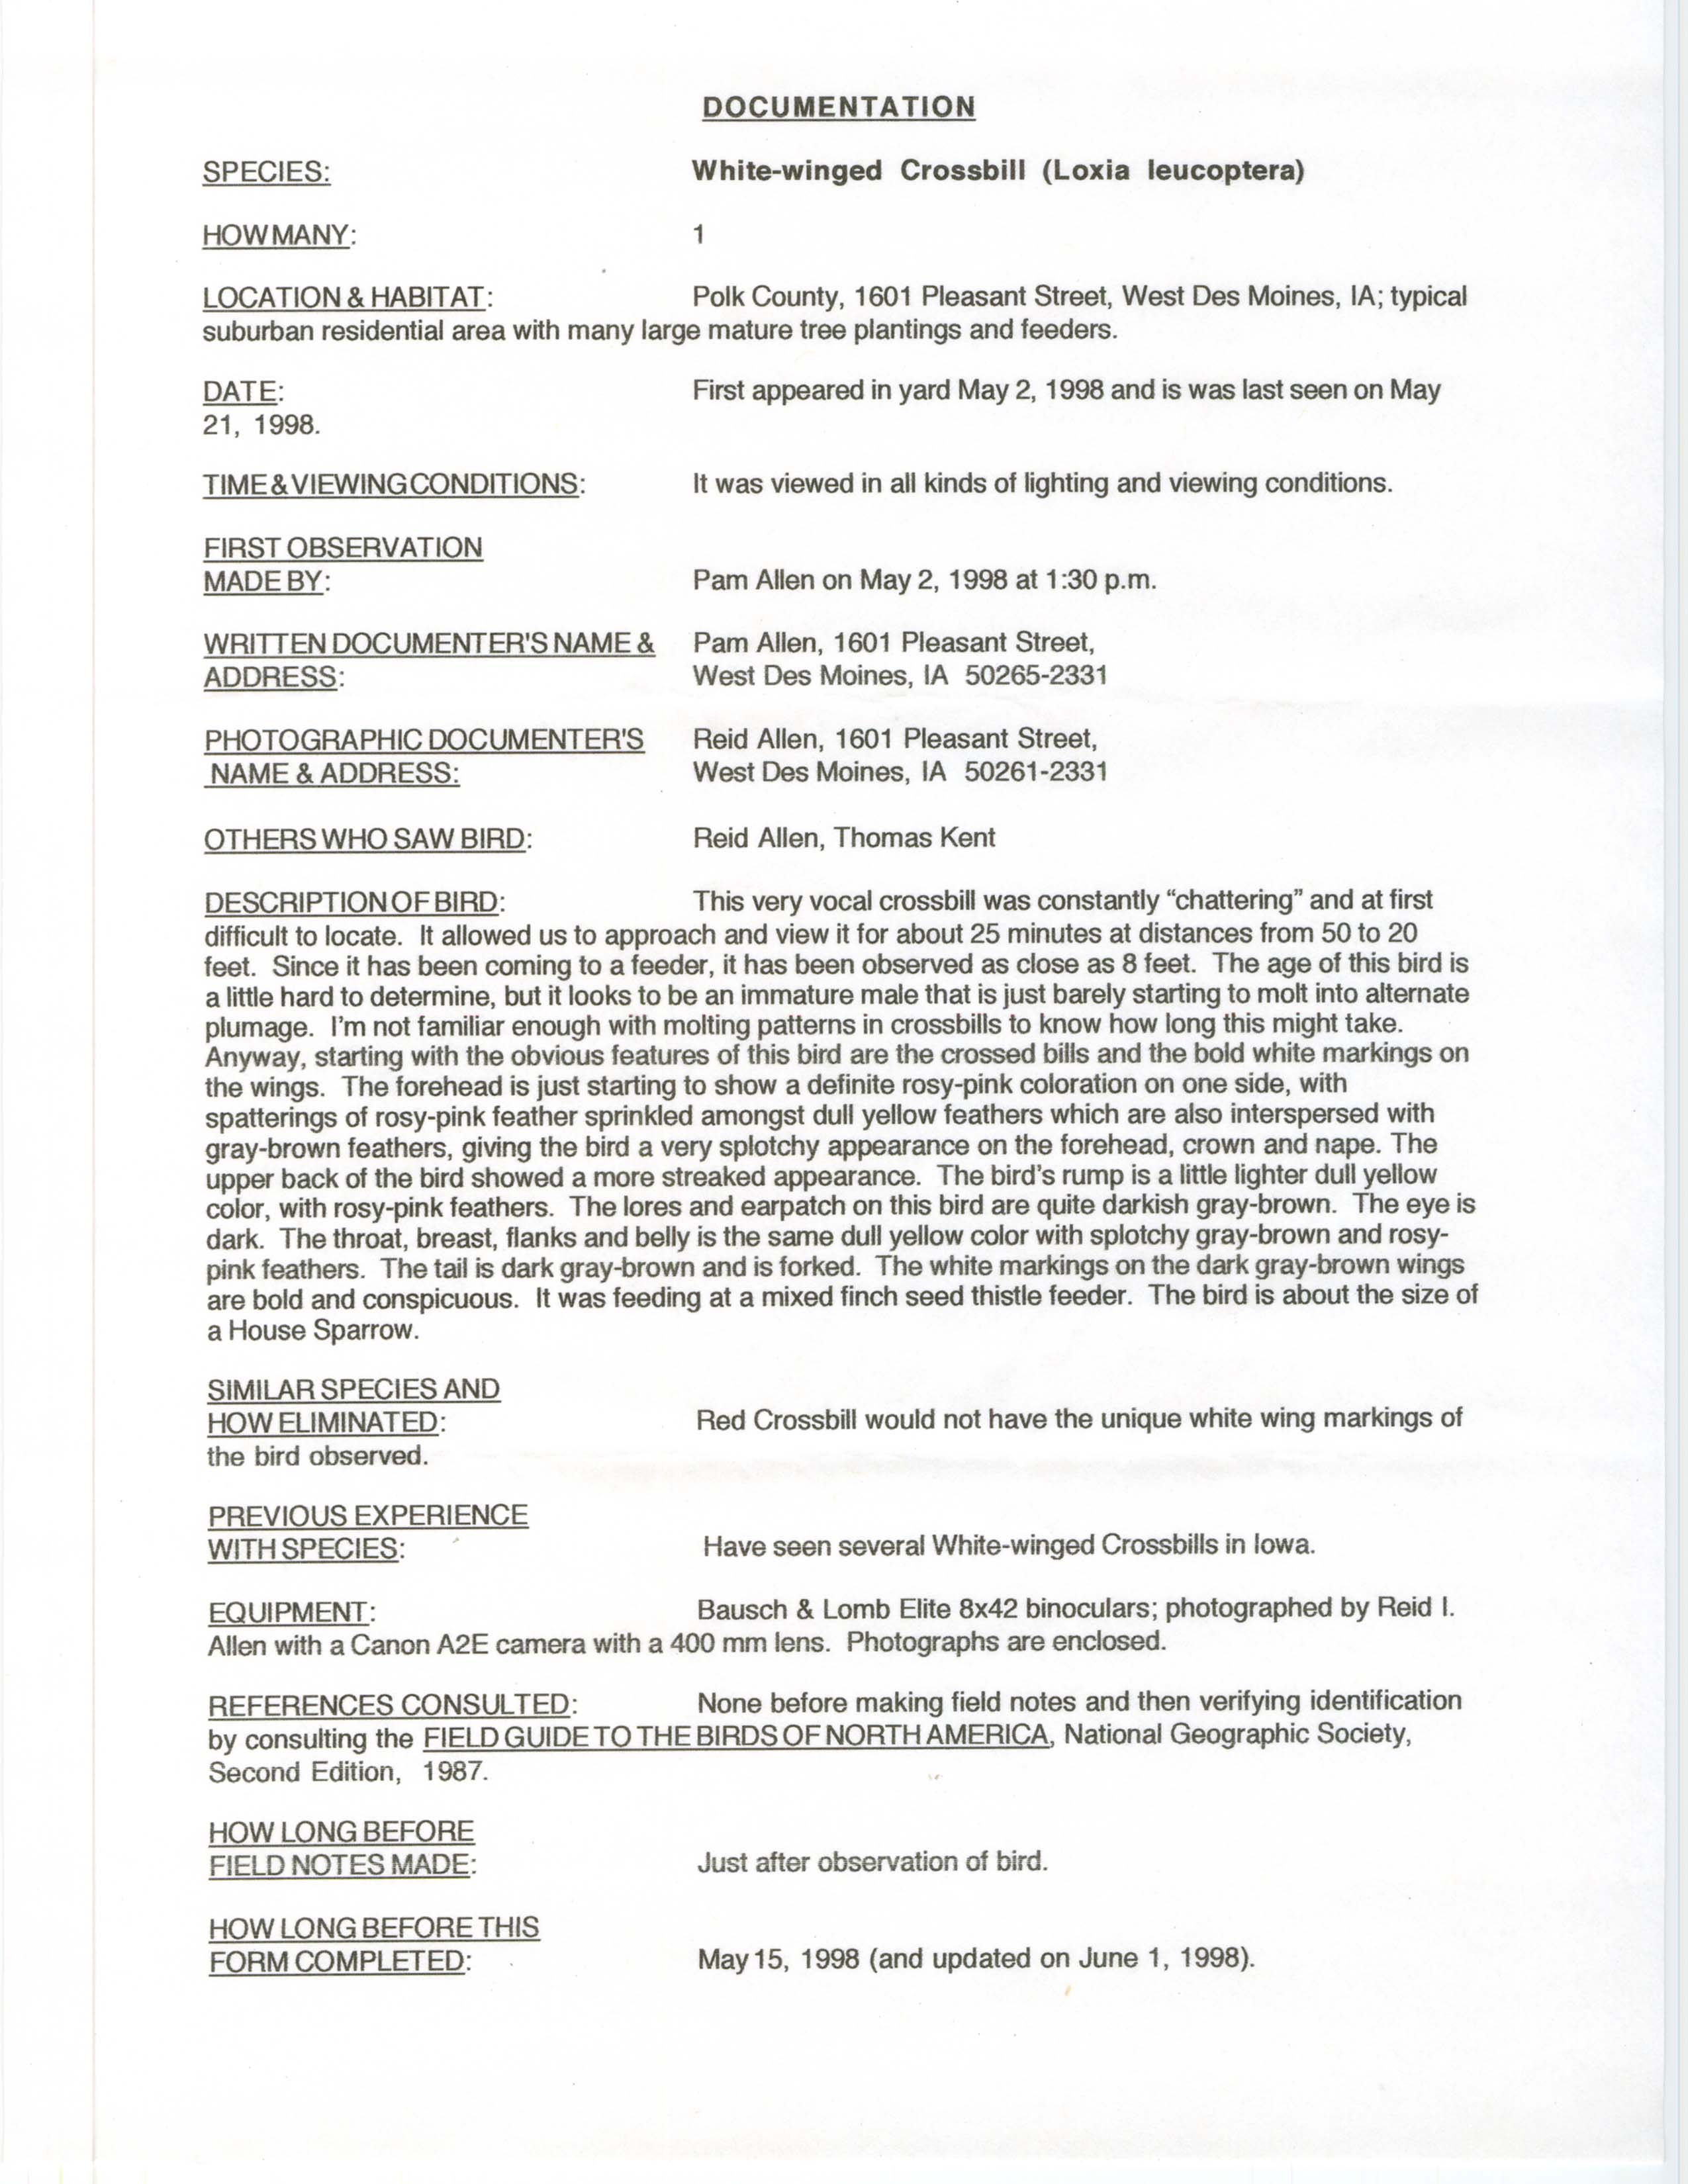 Rare bird documentation form for White-winged Crossbill at West Des Moines in 1998